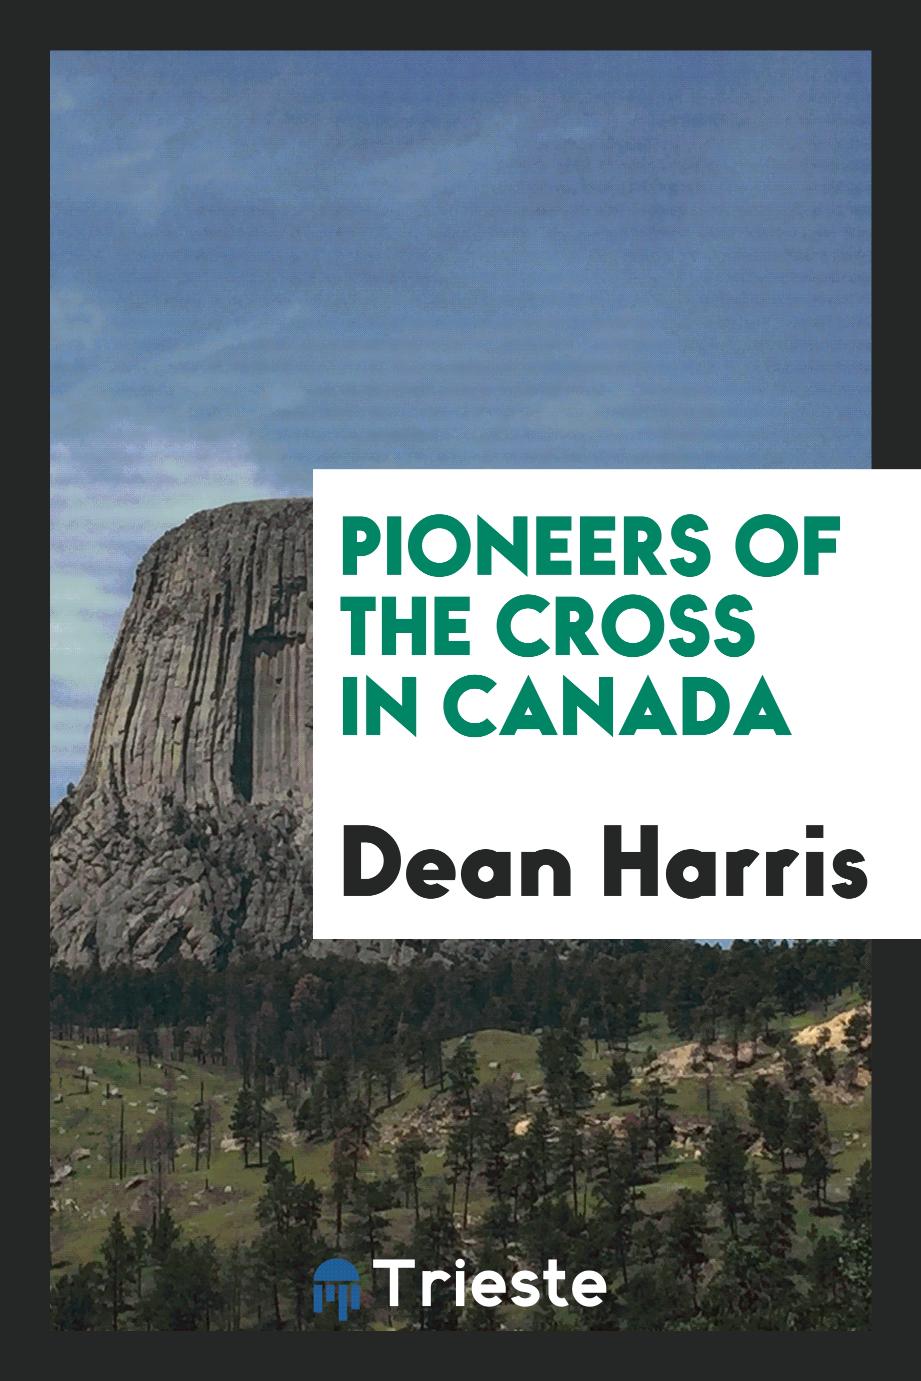 Pioneers of the cross in Canada